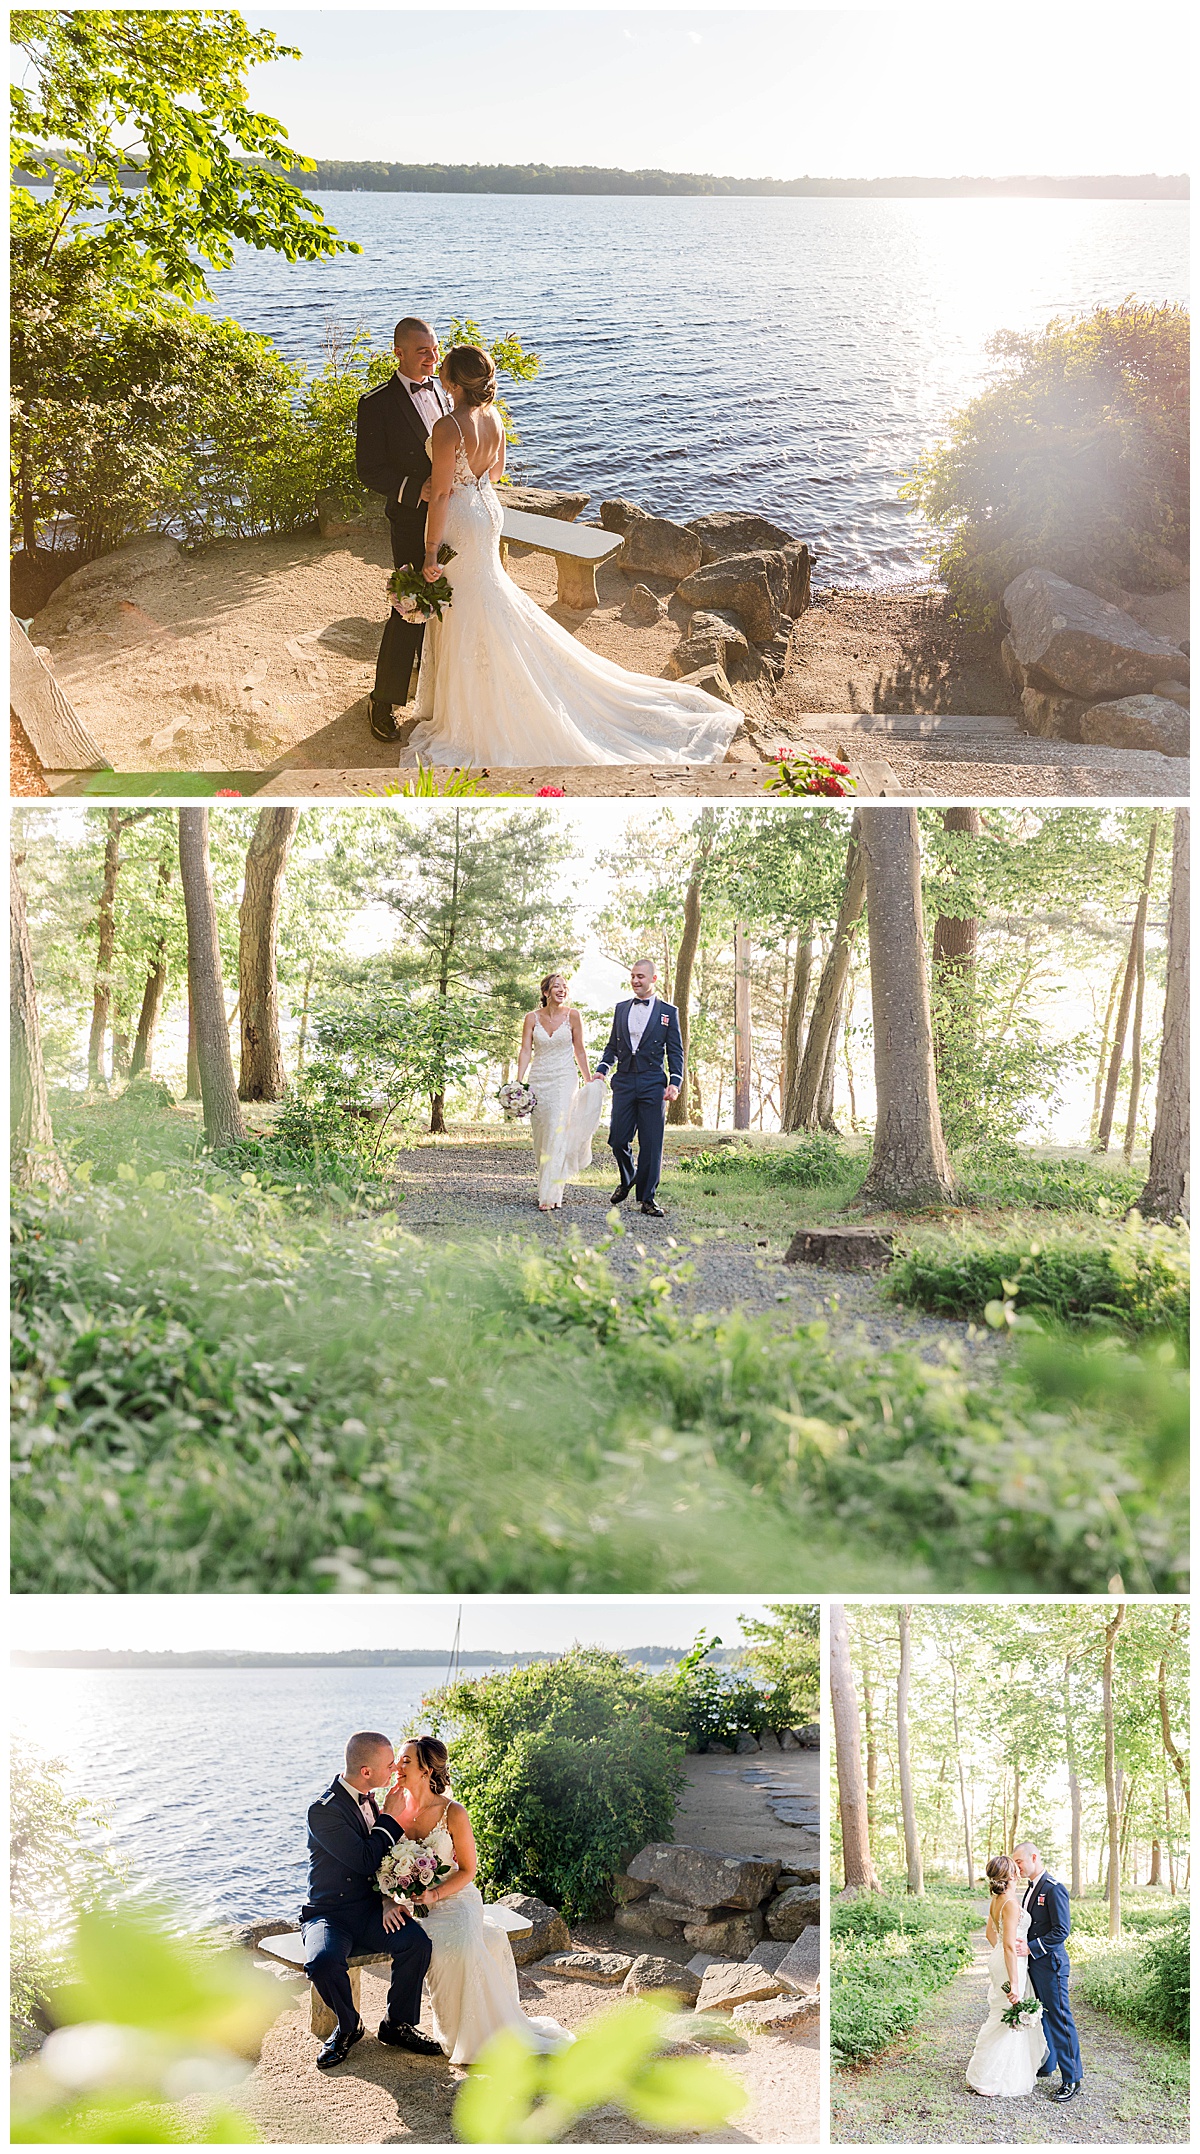 The lake and the forest are just a few of the picture-worthy locations found at Saphire Estate in Sharon MA. 